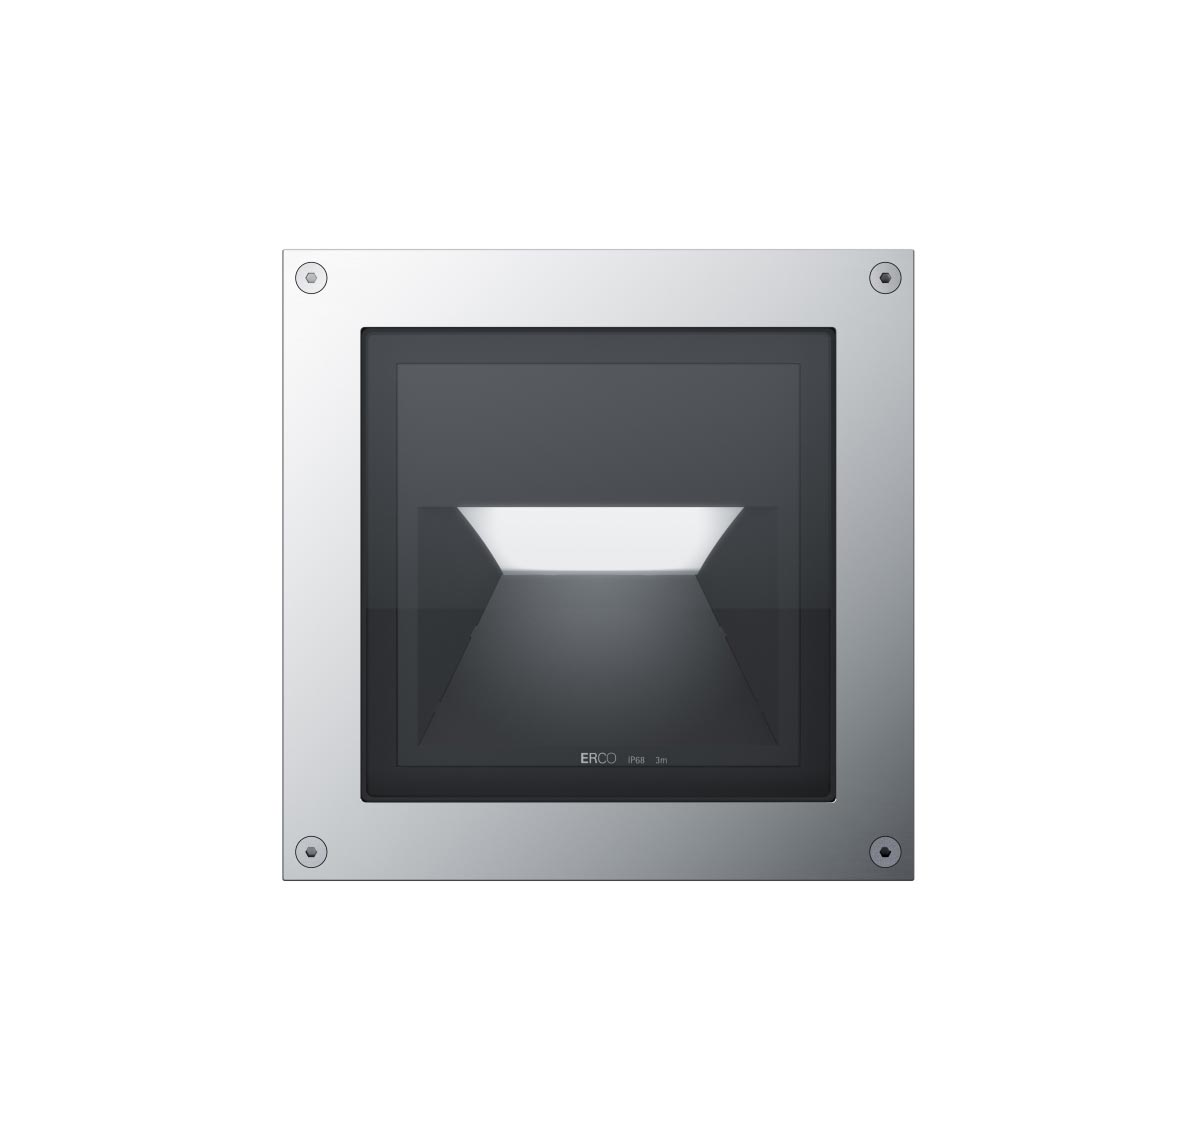 Tesis IP68 Square In-ground Wallwasher 8W LED 4000K ECG Stainless Steel Covered Trim